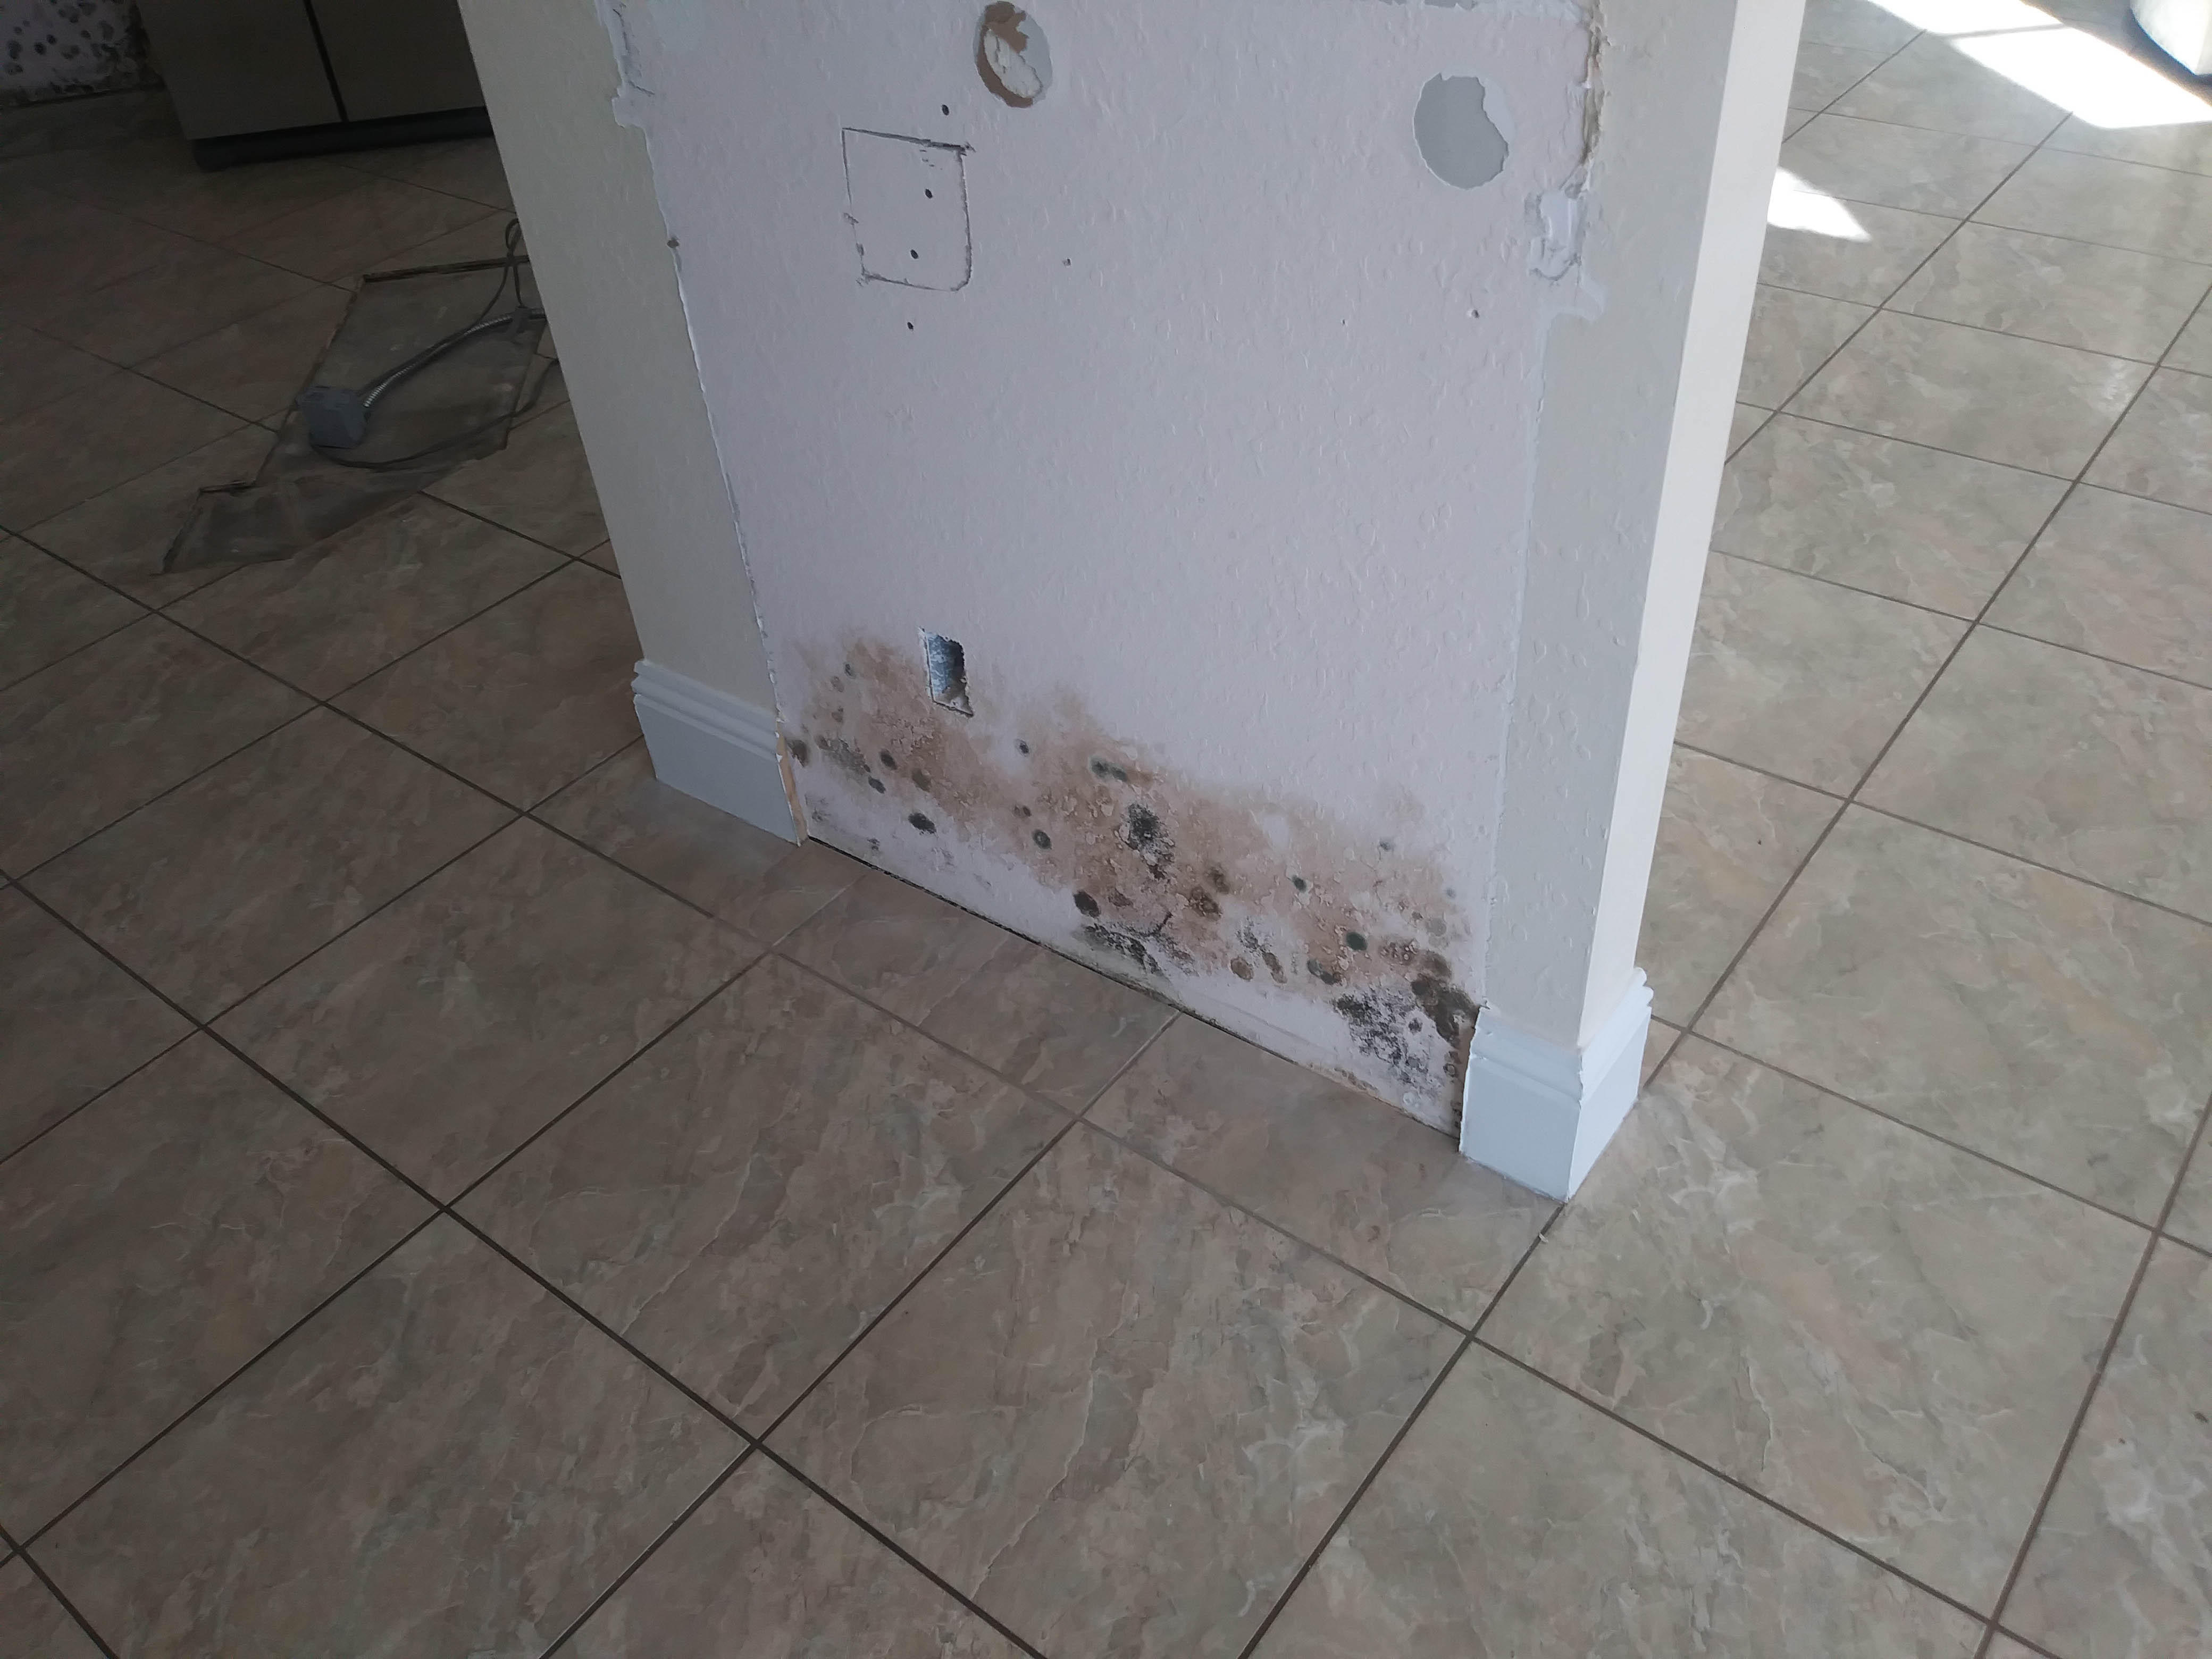 Mold growth can be difficult to diagnose, luckily our trained professionals complete extensive training in order to do this and rid your property of the growth.